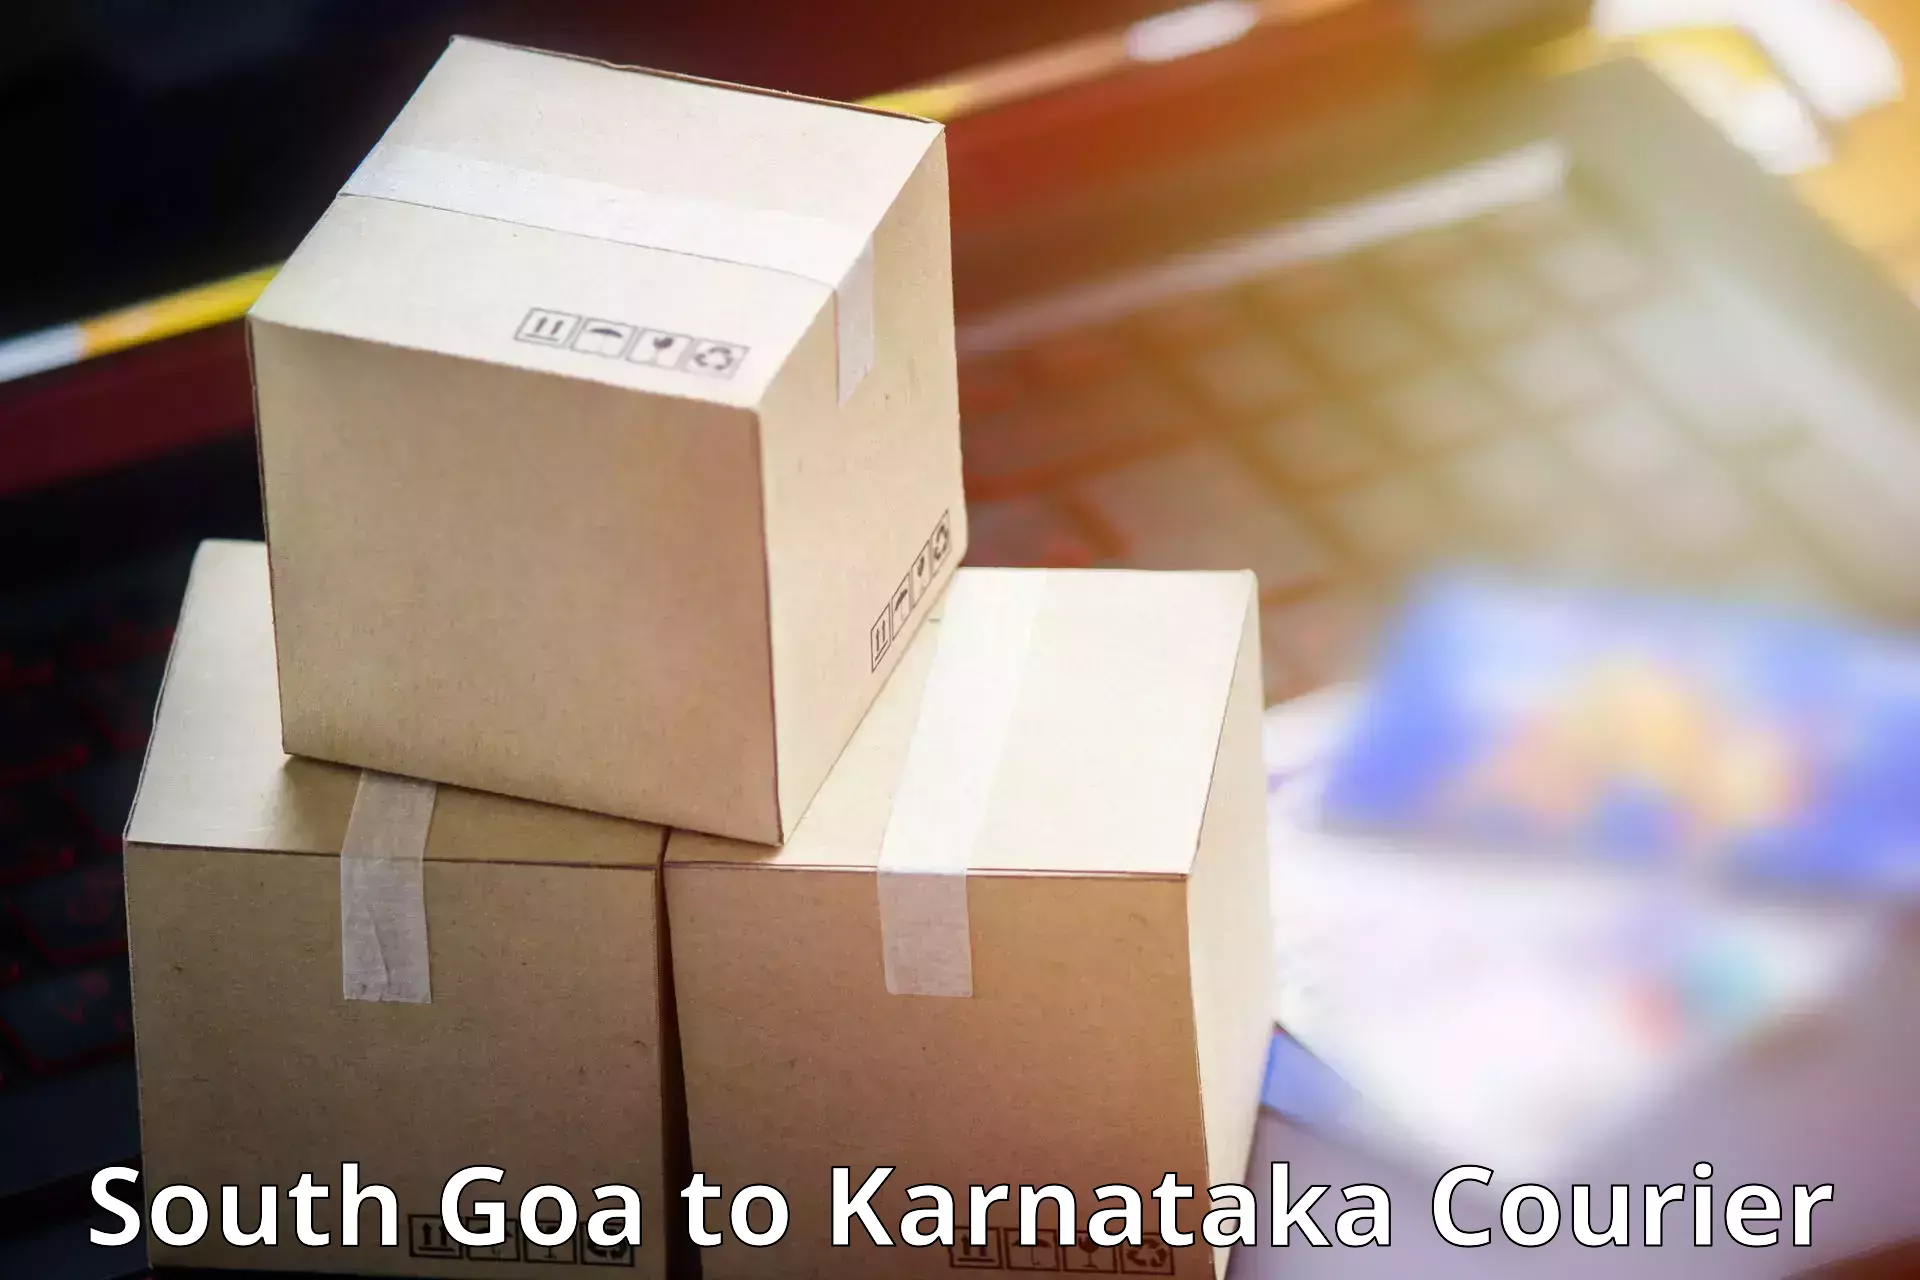 Courier service innovation South Goa to Hukkeri